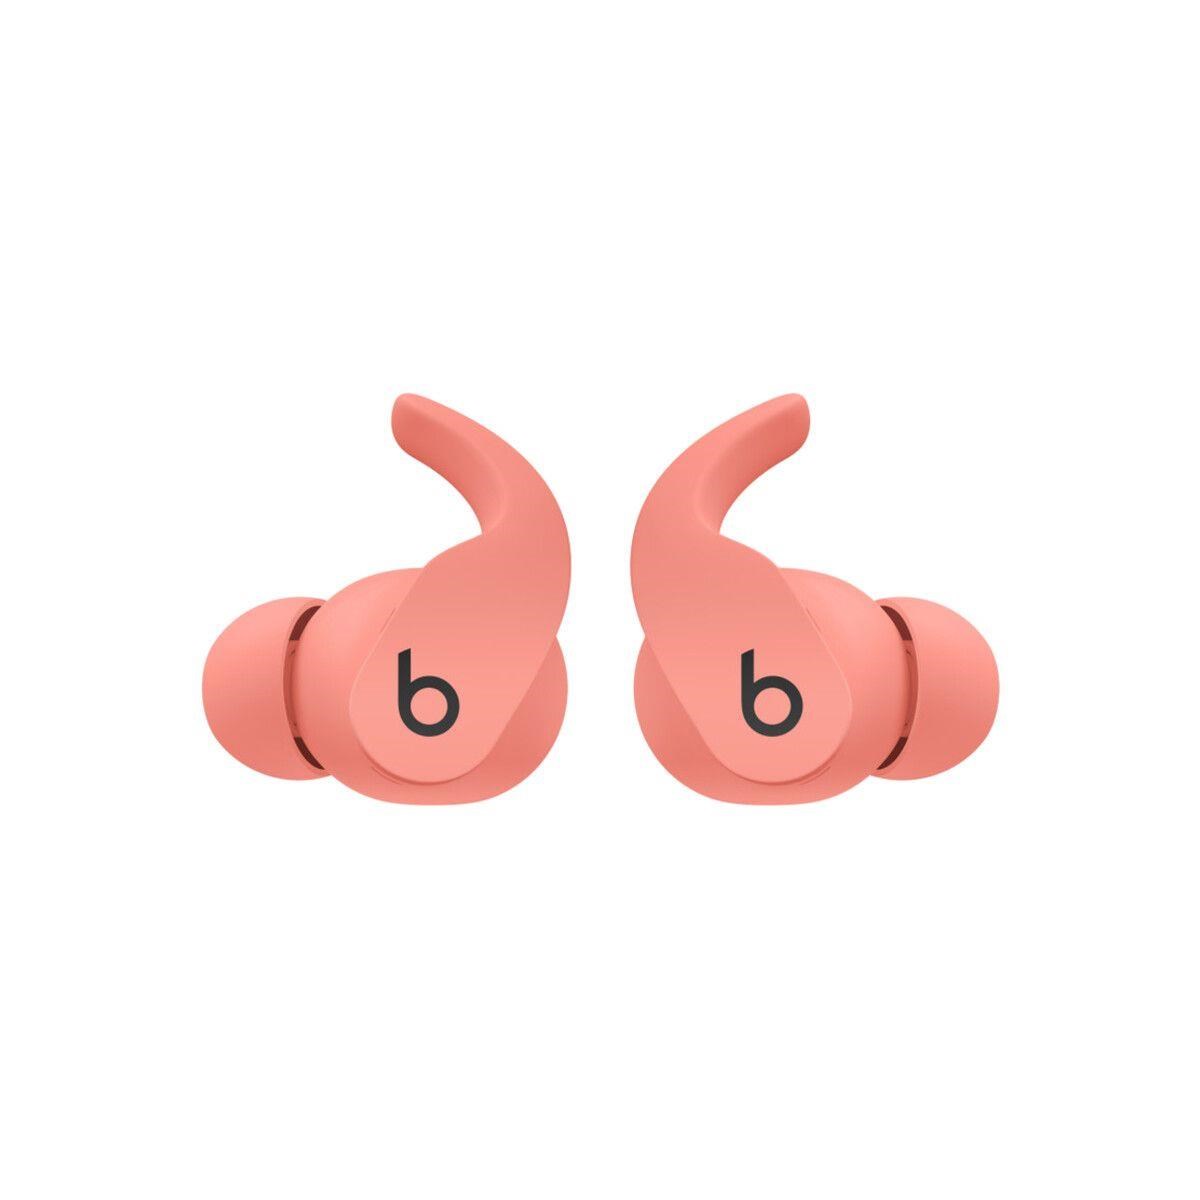 Beats Fit Pro True Wireless Earbuds - Coral Pink1 